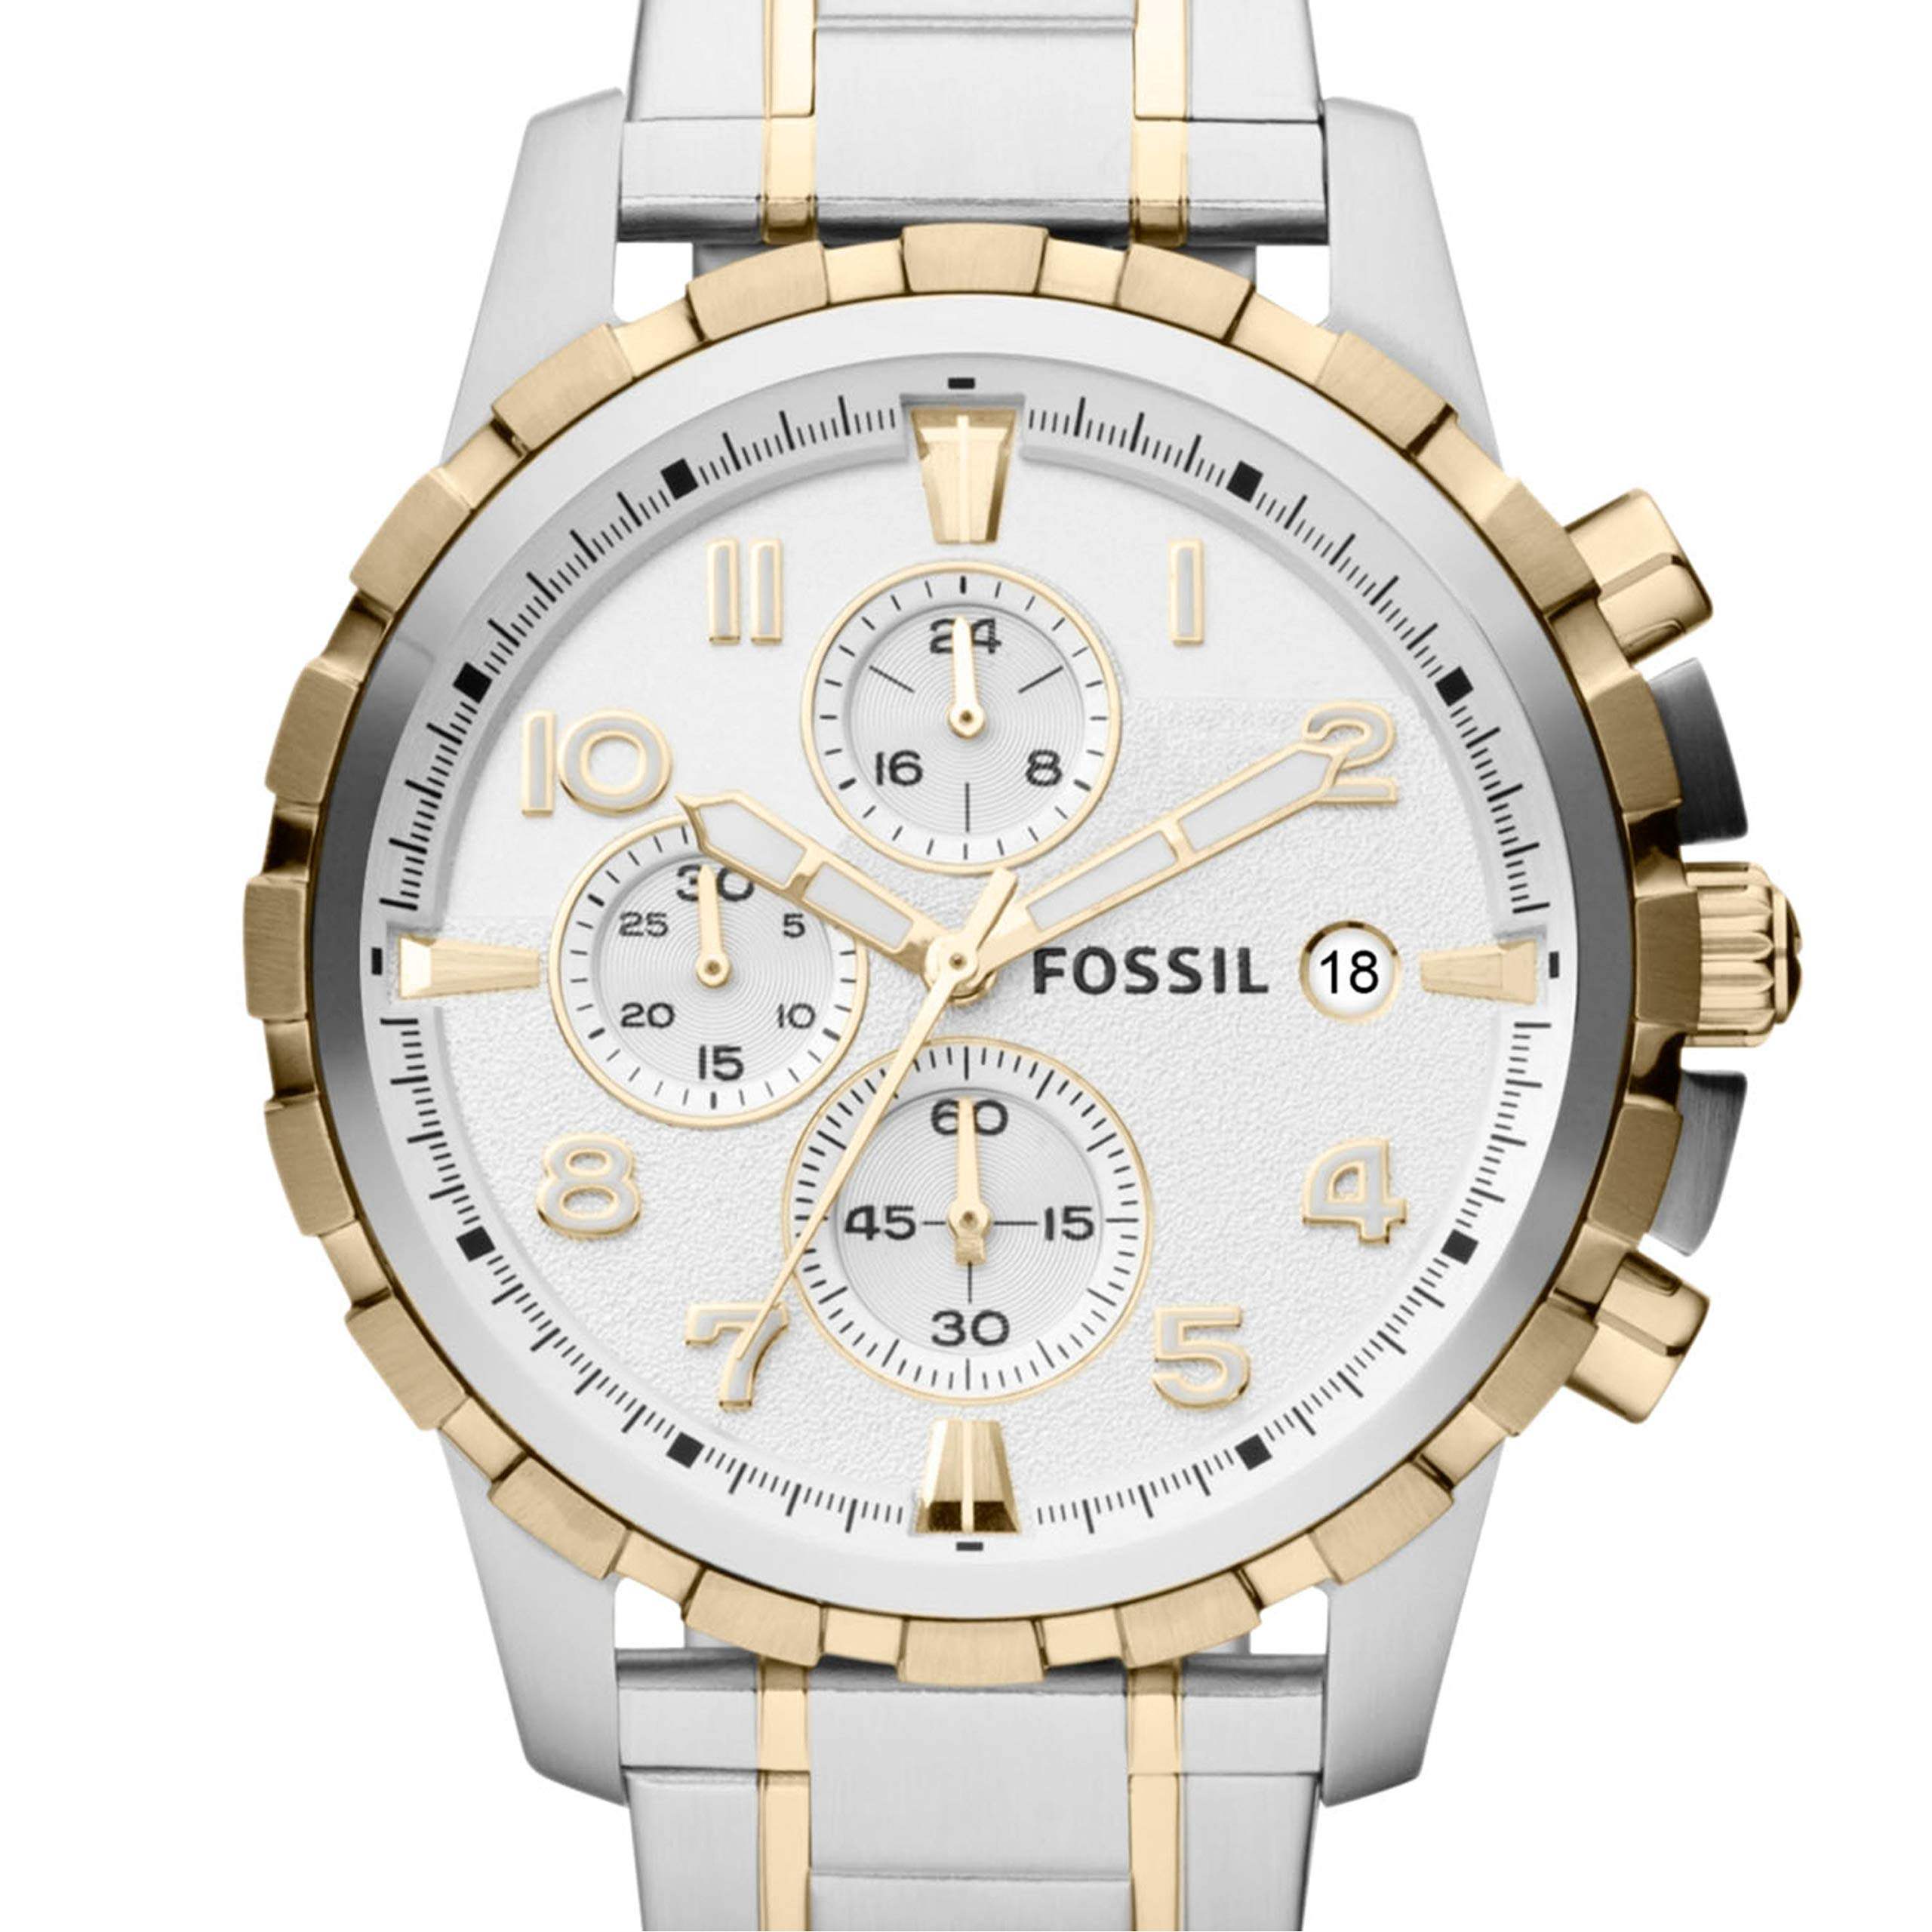 Fossil Dean Men's Dress Watch with Chronograph Display and Stainless Steel Bracelet Band